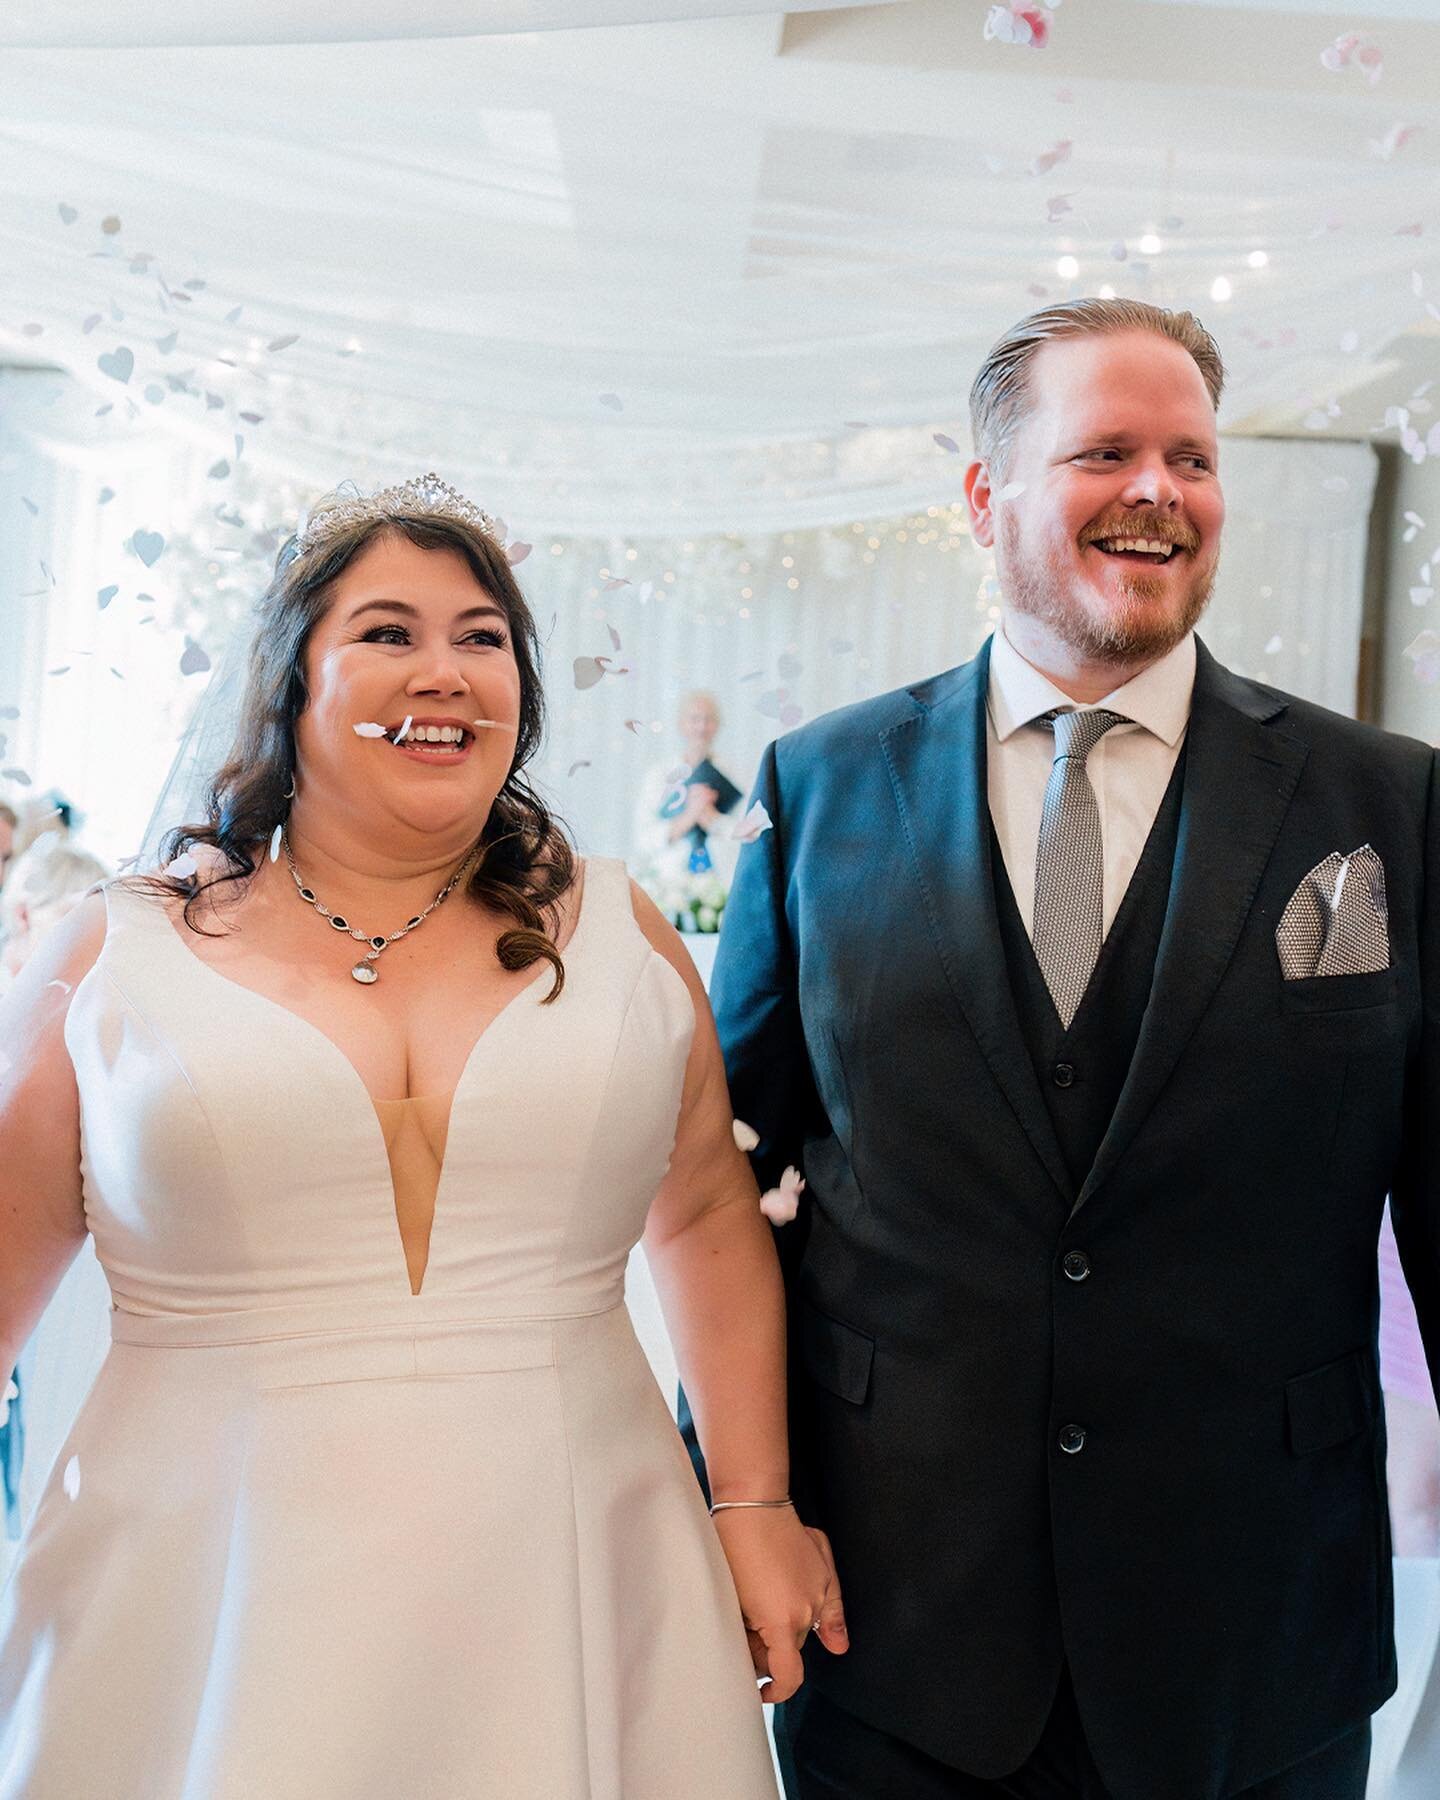 Leanne and Dave took their love game to a whole new level with a mind-blowing confetti shot during their indoor ceremony at @the_grand_torquay 🎉

I was living for it, capturing their pure joy and excitement as they kicked off this epic journey toget